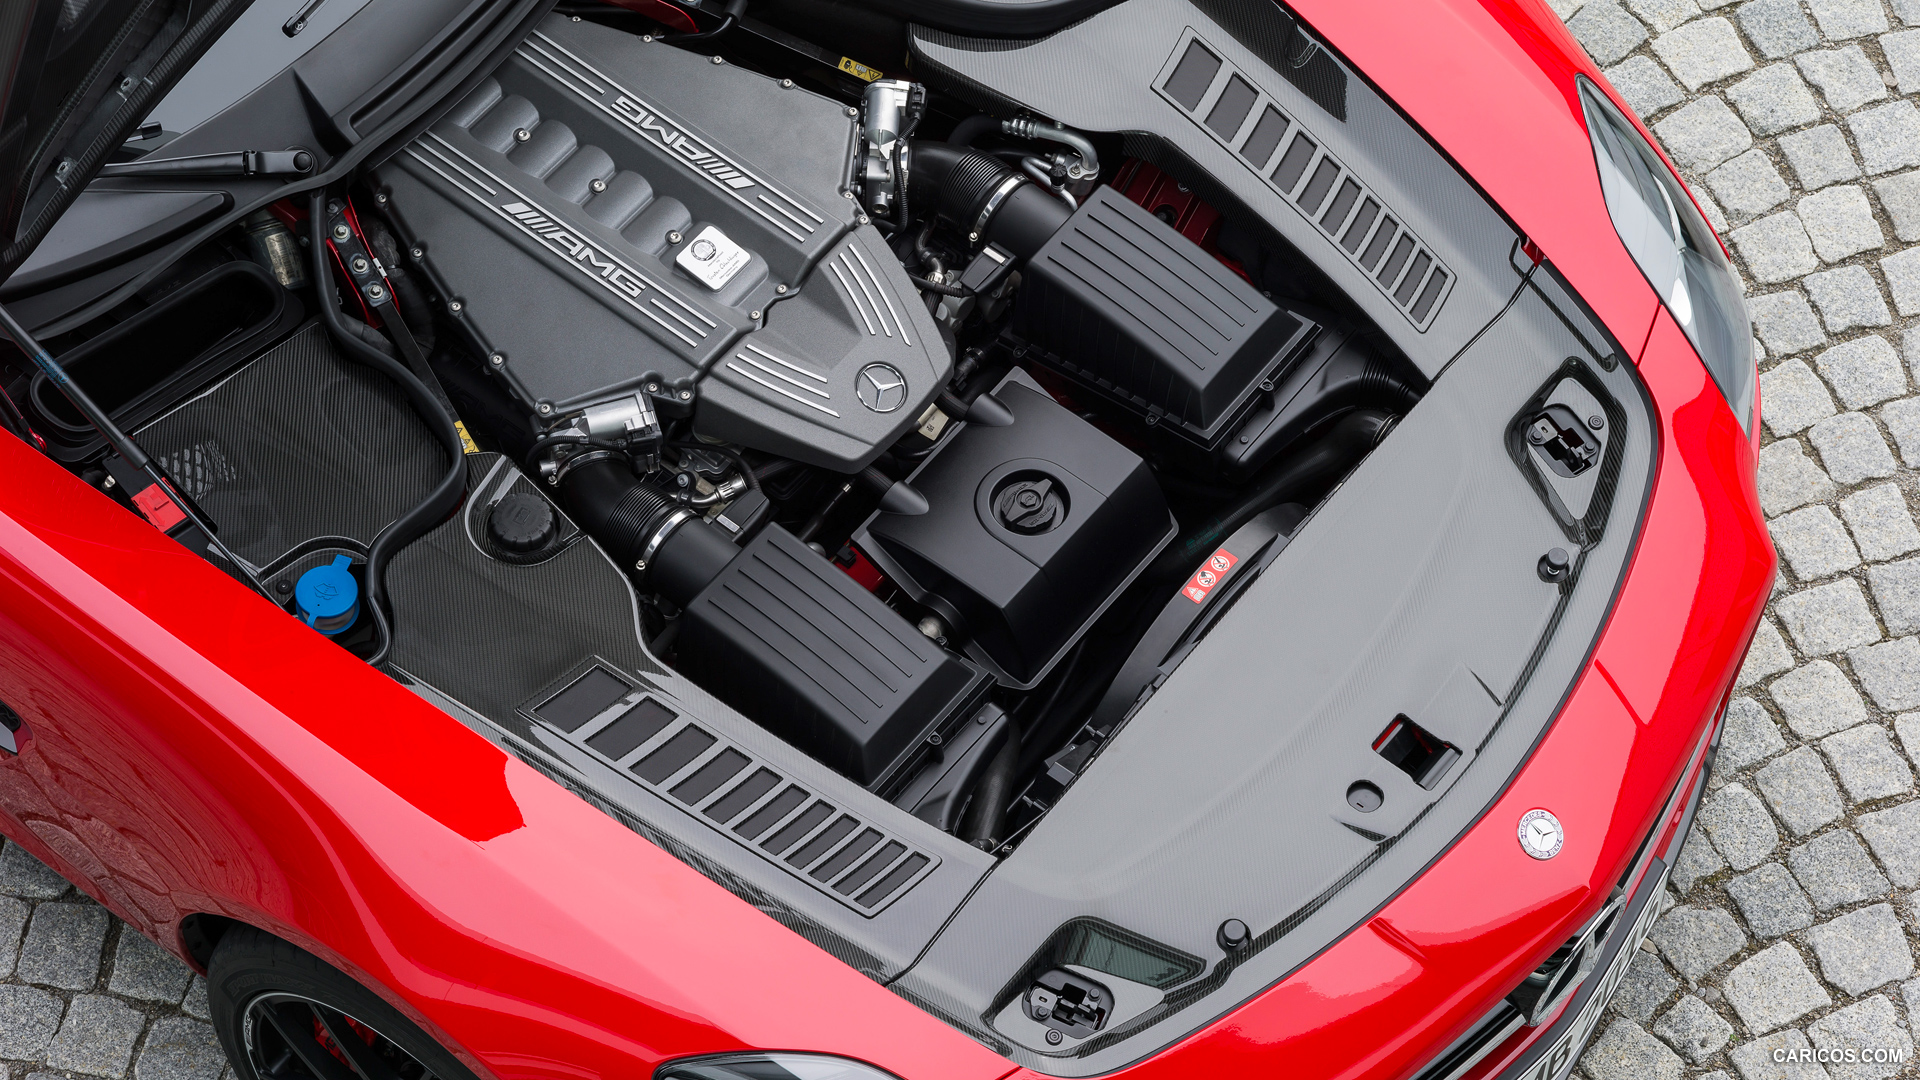  2015 Mercedes-Benz SLS AMG GT Coupe Final Edition - Engine, #26 of 41